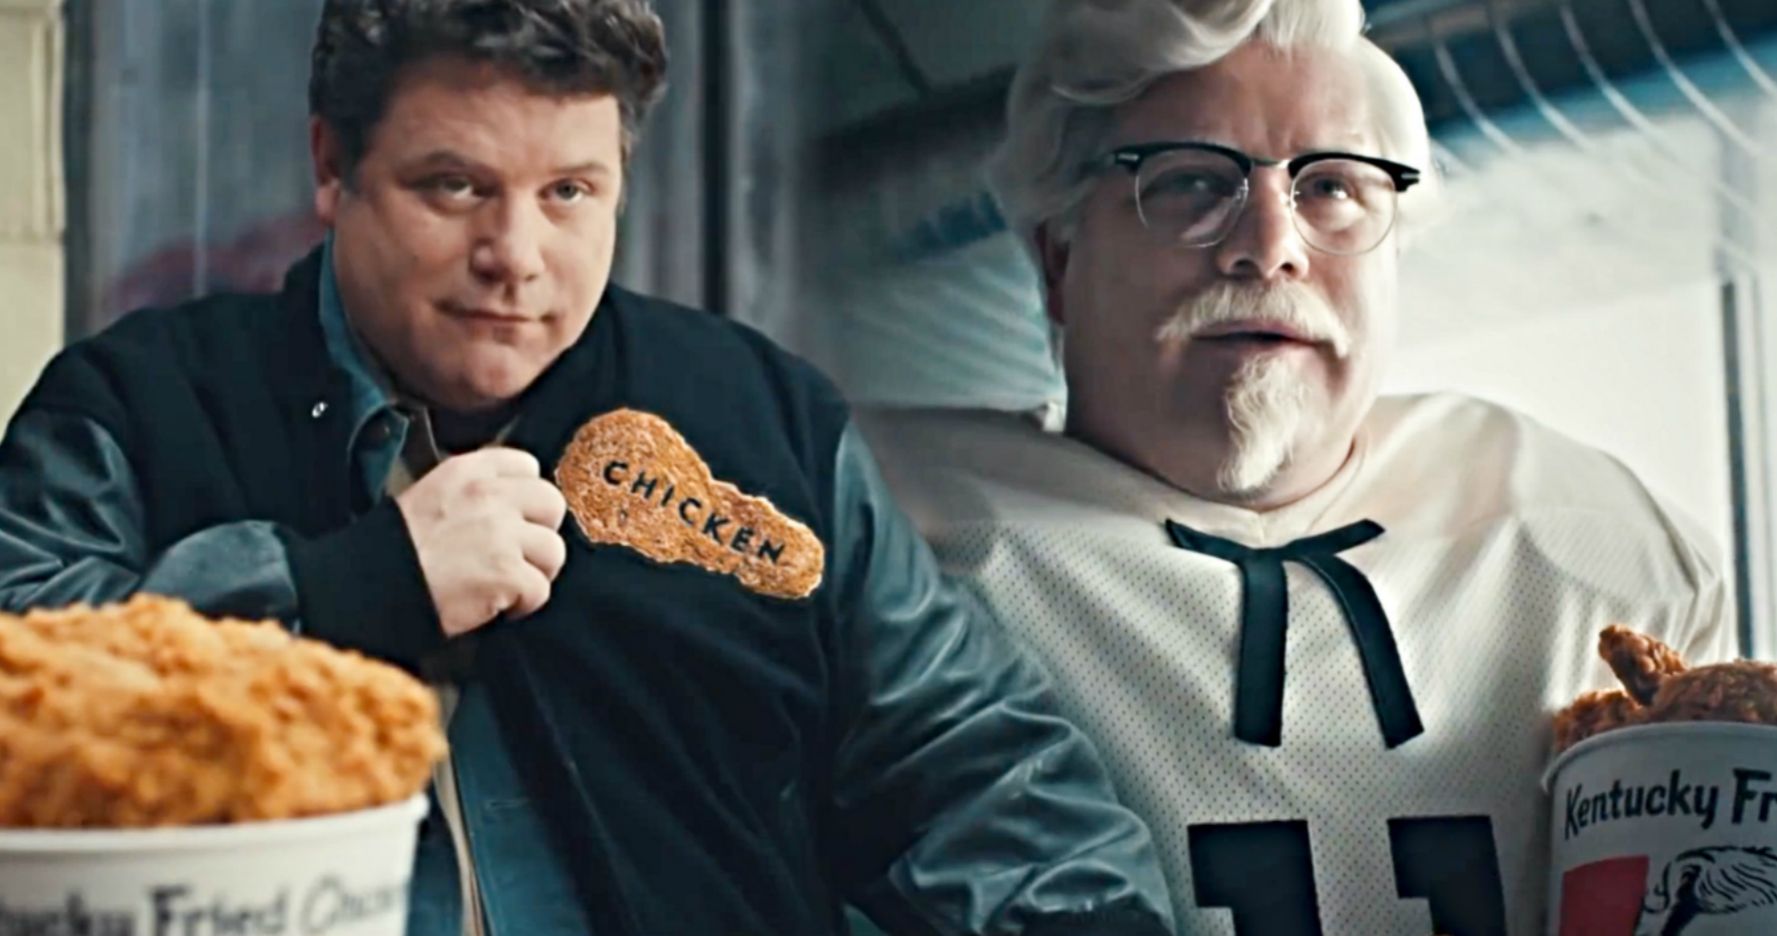 Rudy 2 Watch Sean Astin Reprise Iconic Role in New KFC Commercial